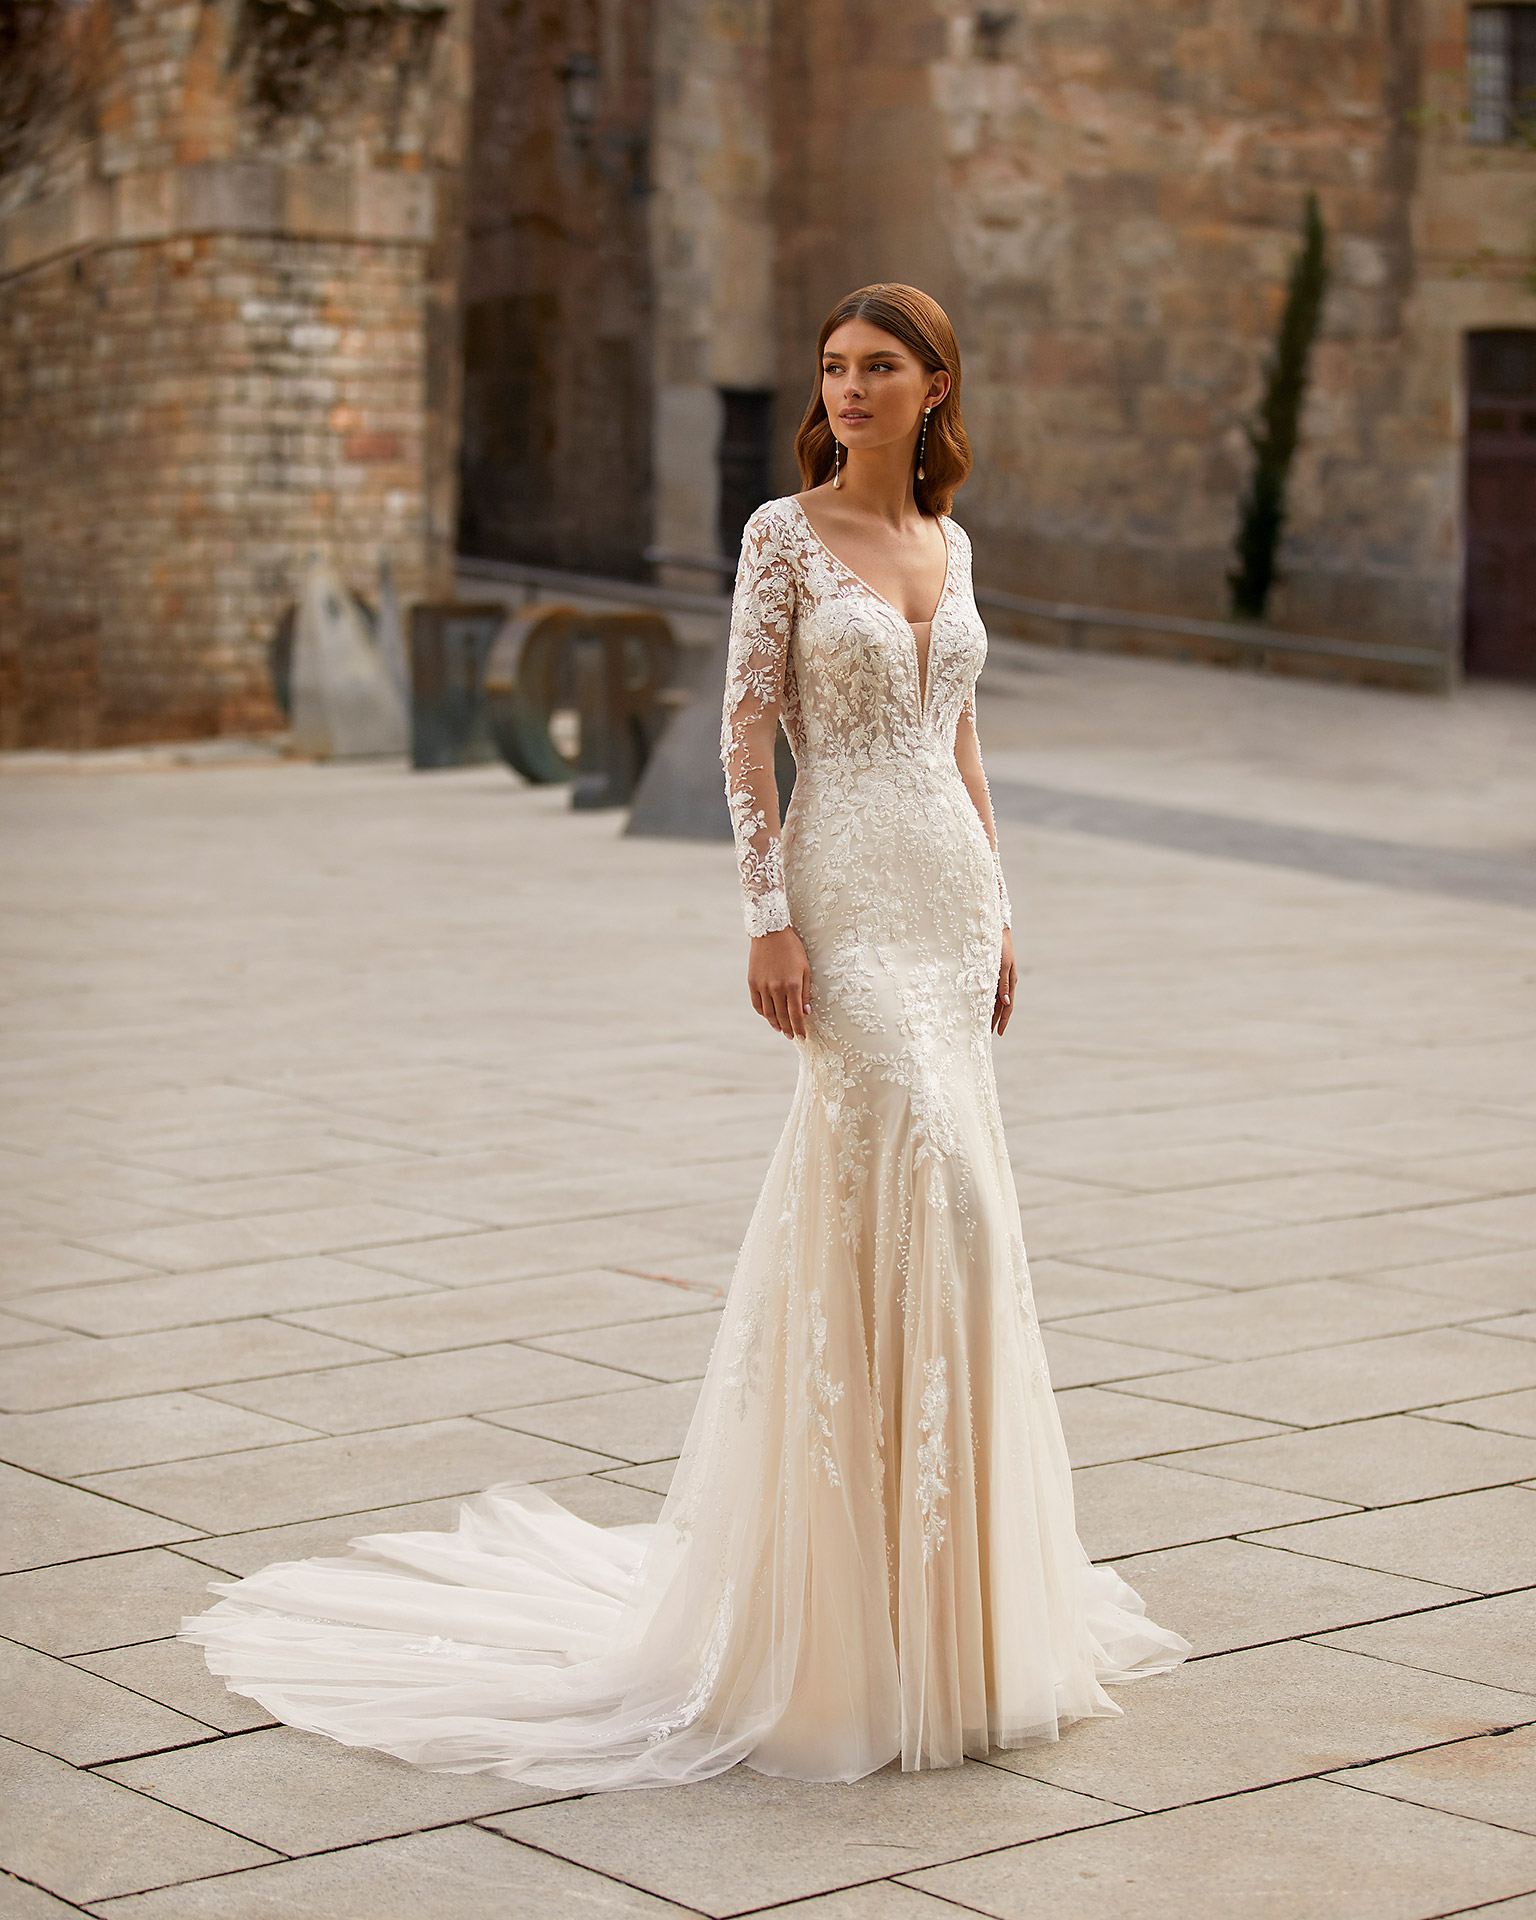 Sexy mermaid-style wedding dress, made of lace with a tulle skirt; with a deep-plunge neckline with beadwork detail, a back with a round slit, and long tulle and lace sleeves. Unique Luna Novias look made of lace embellished with beadwork. LUNA_NOVIAS.